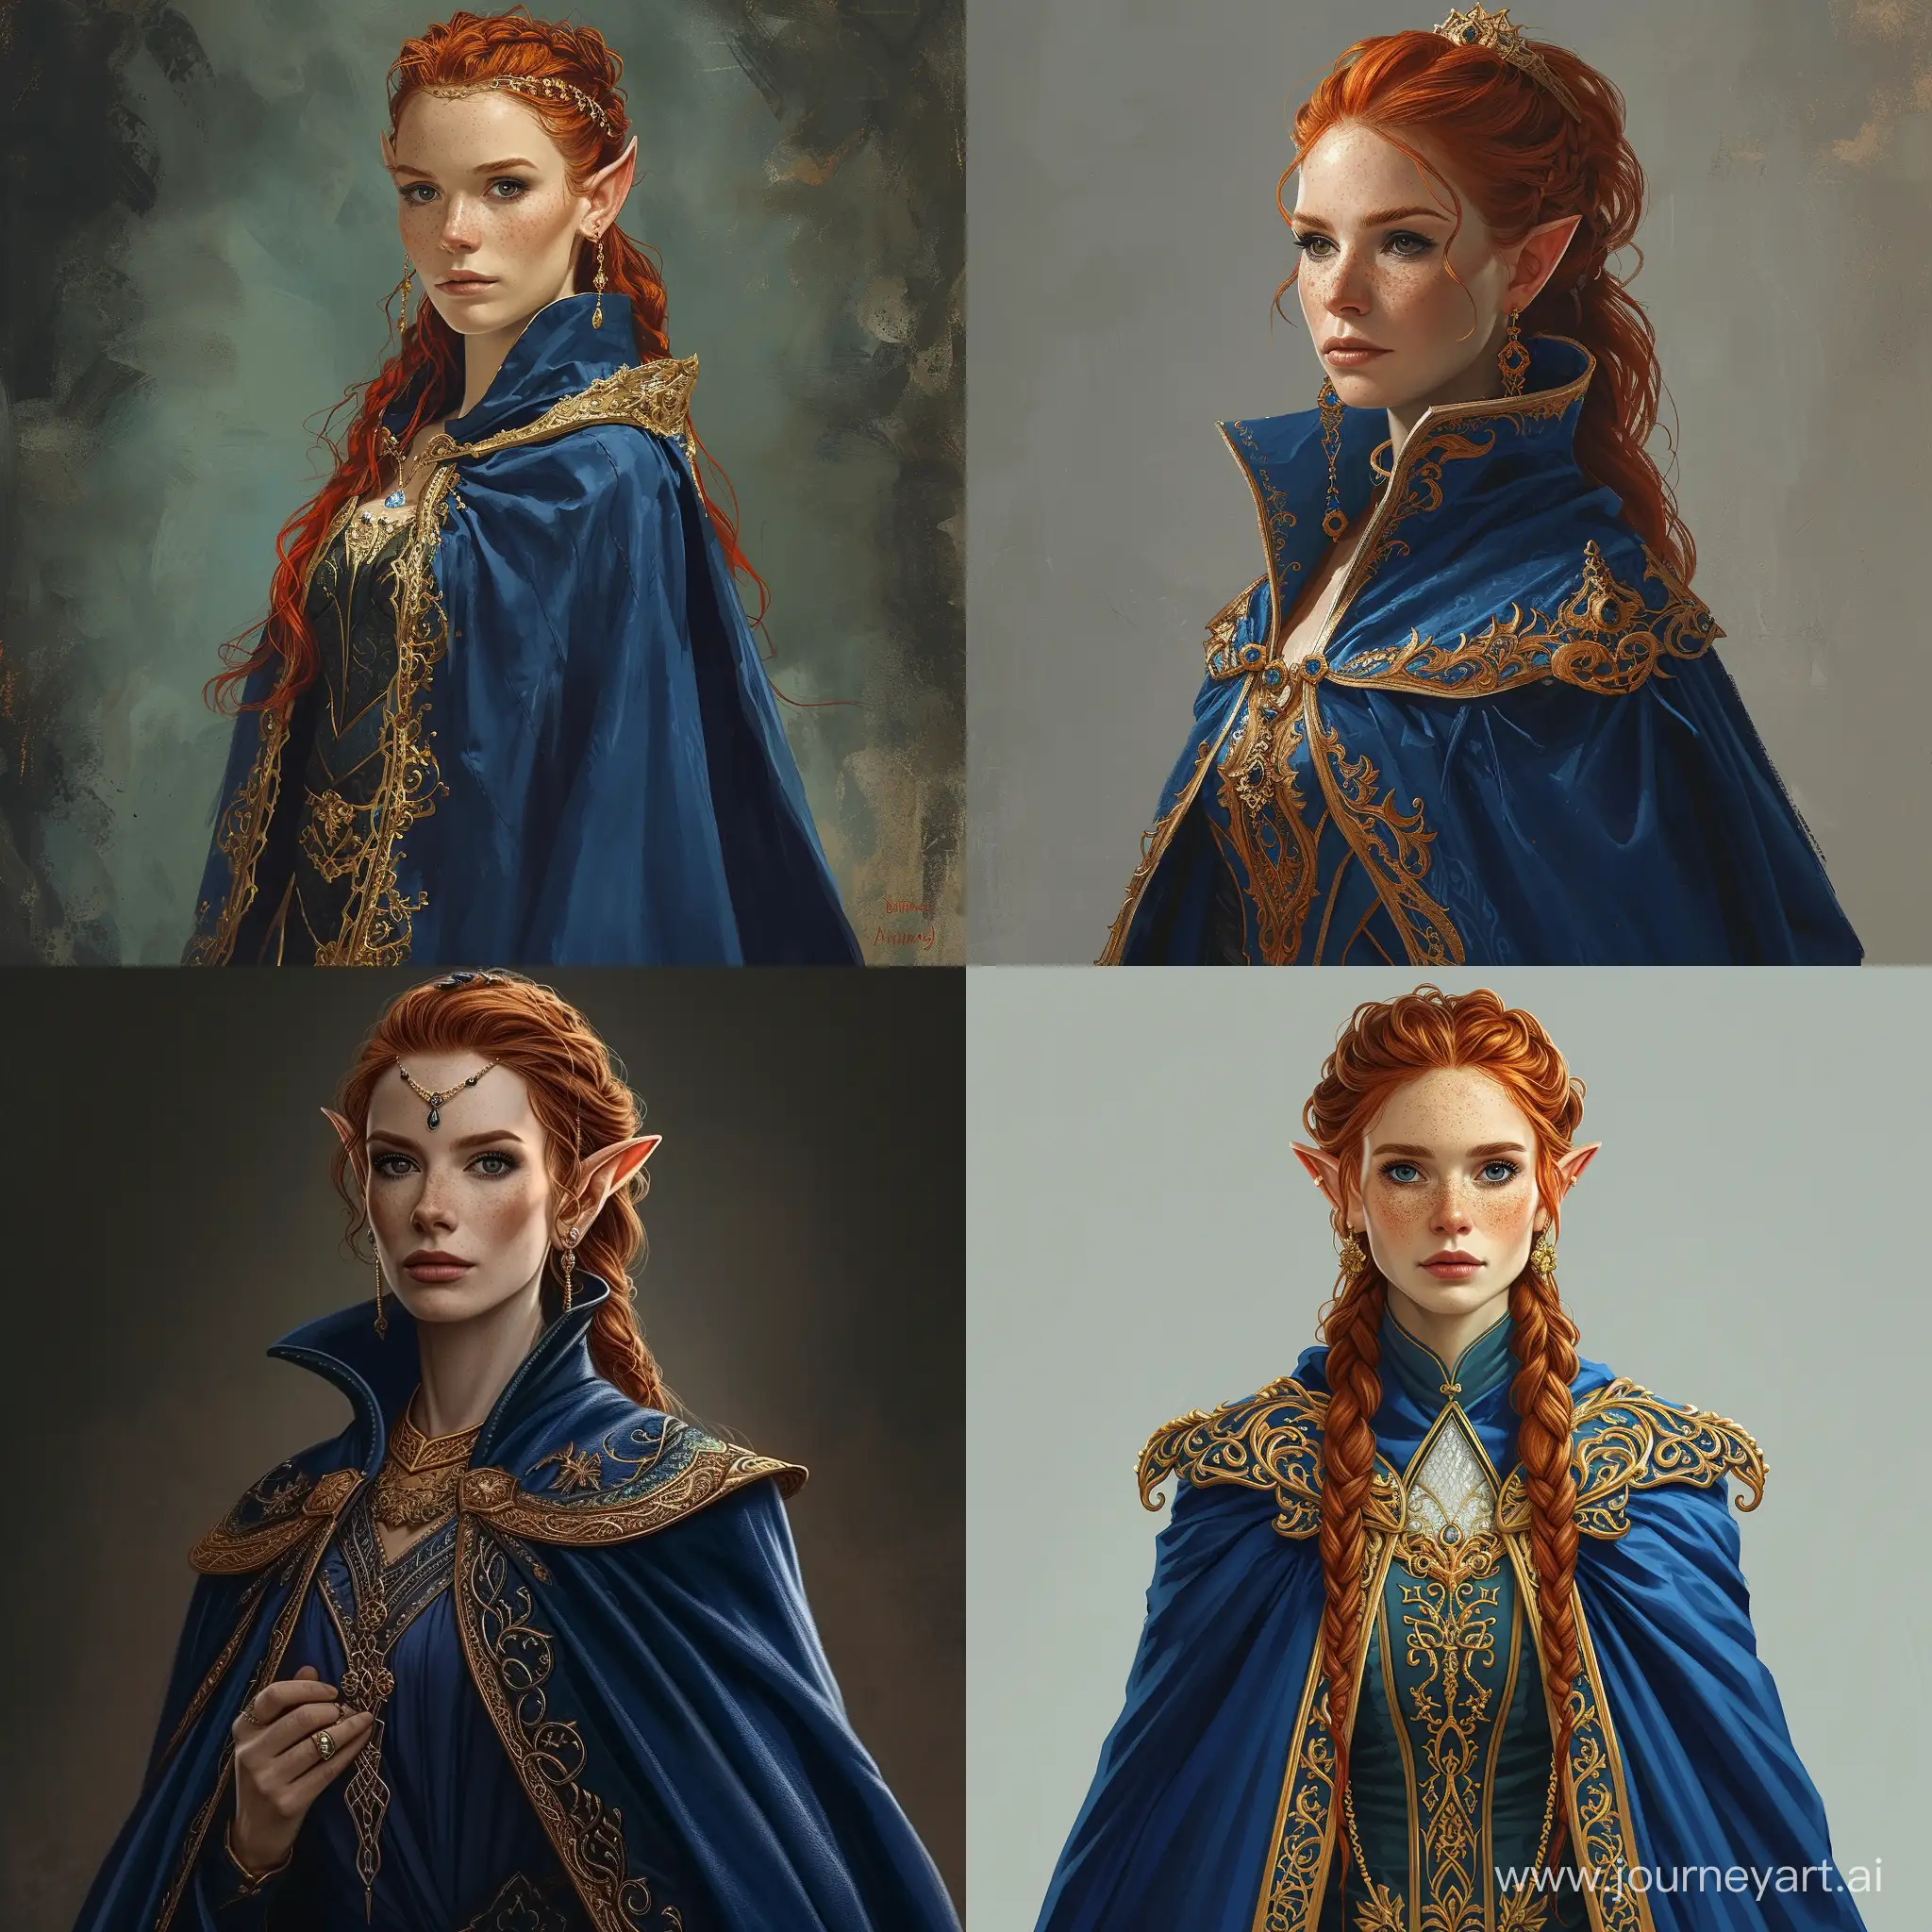 a woman with red hair wearing a blue cape, beautiful elf with ornate robes, portrait of an elf queen, beautiful and elegant elf queen, epic exquisite character art, beautiful character painting, portrait of very beautiful elf, portrait of a young elf wizard, stunning character art, portrait female elf wizard, portrait of a female mage, beautiful and elegant female elf, dnd character art portrait